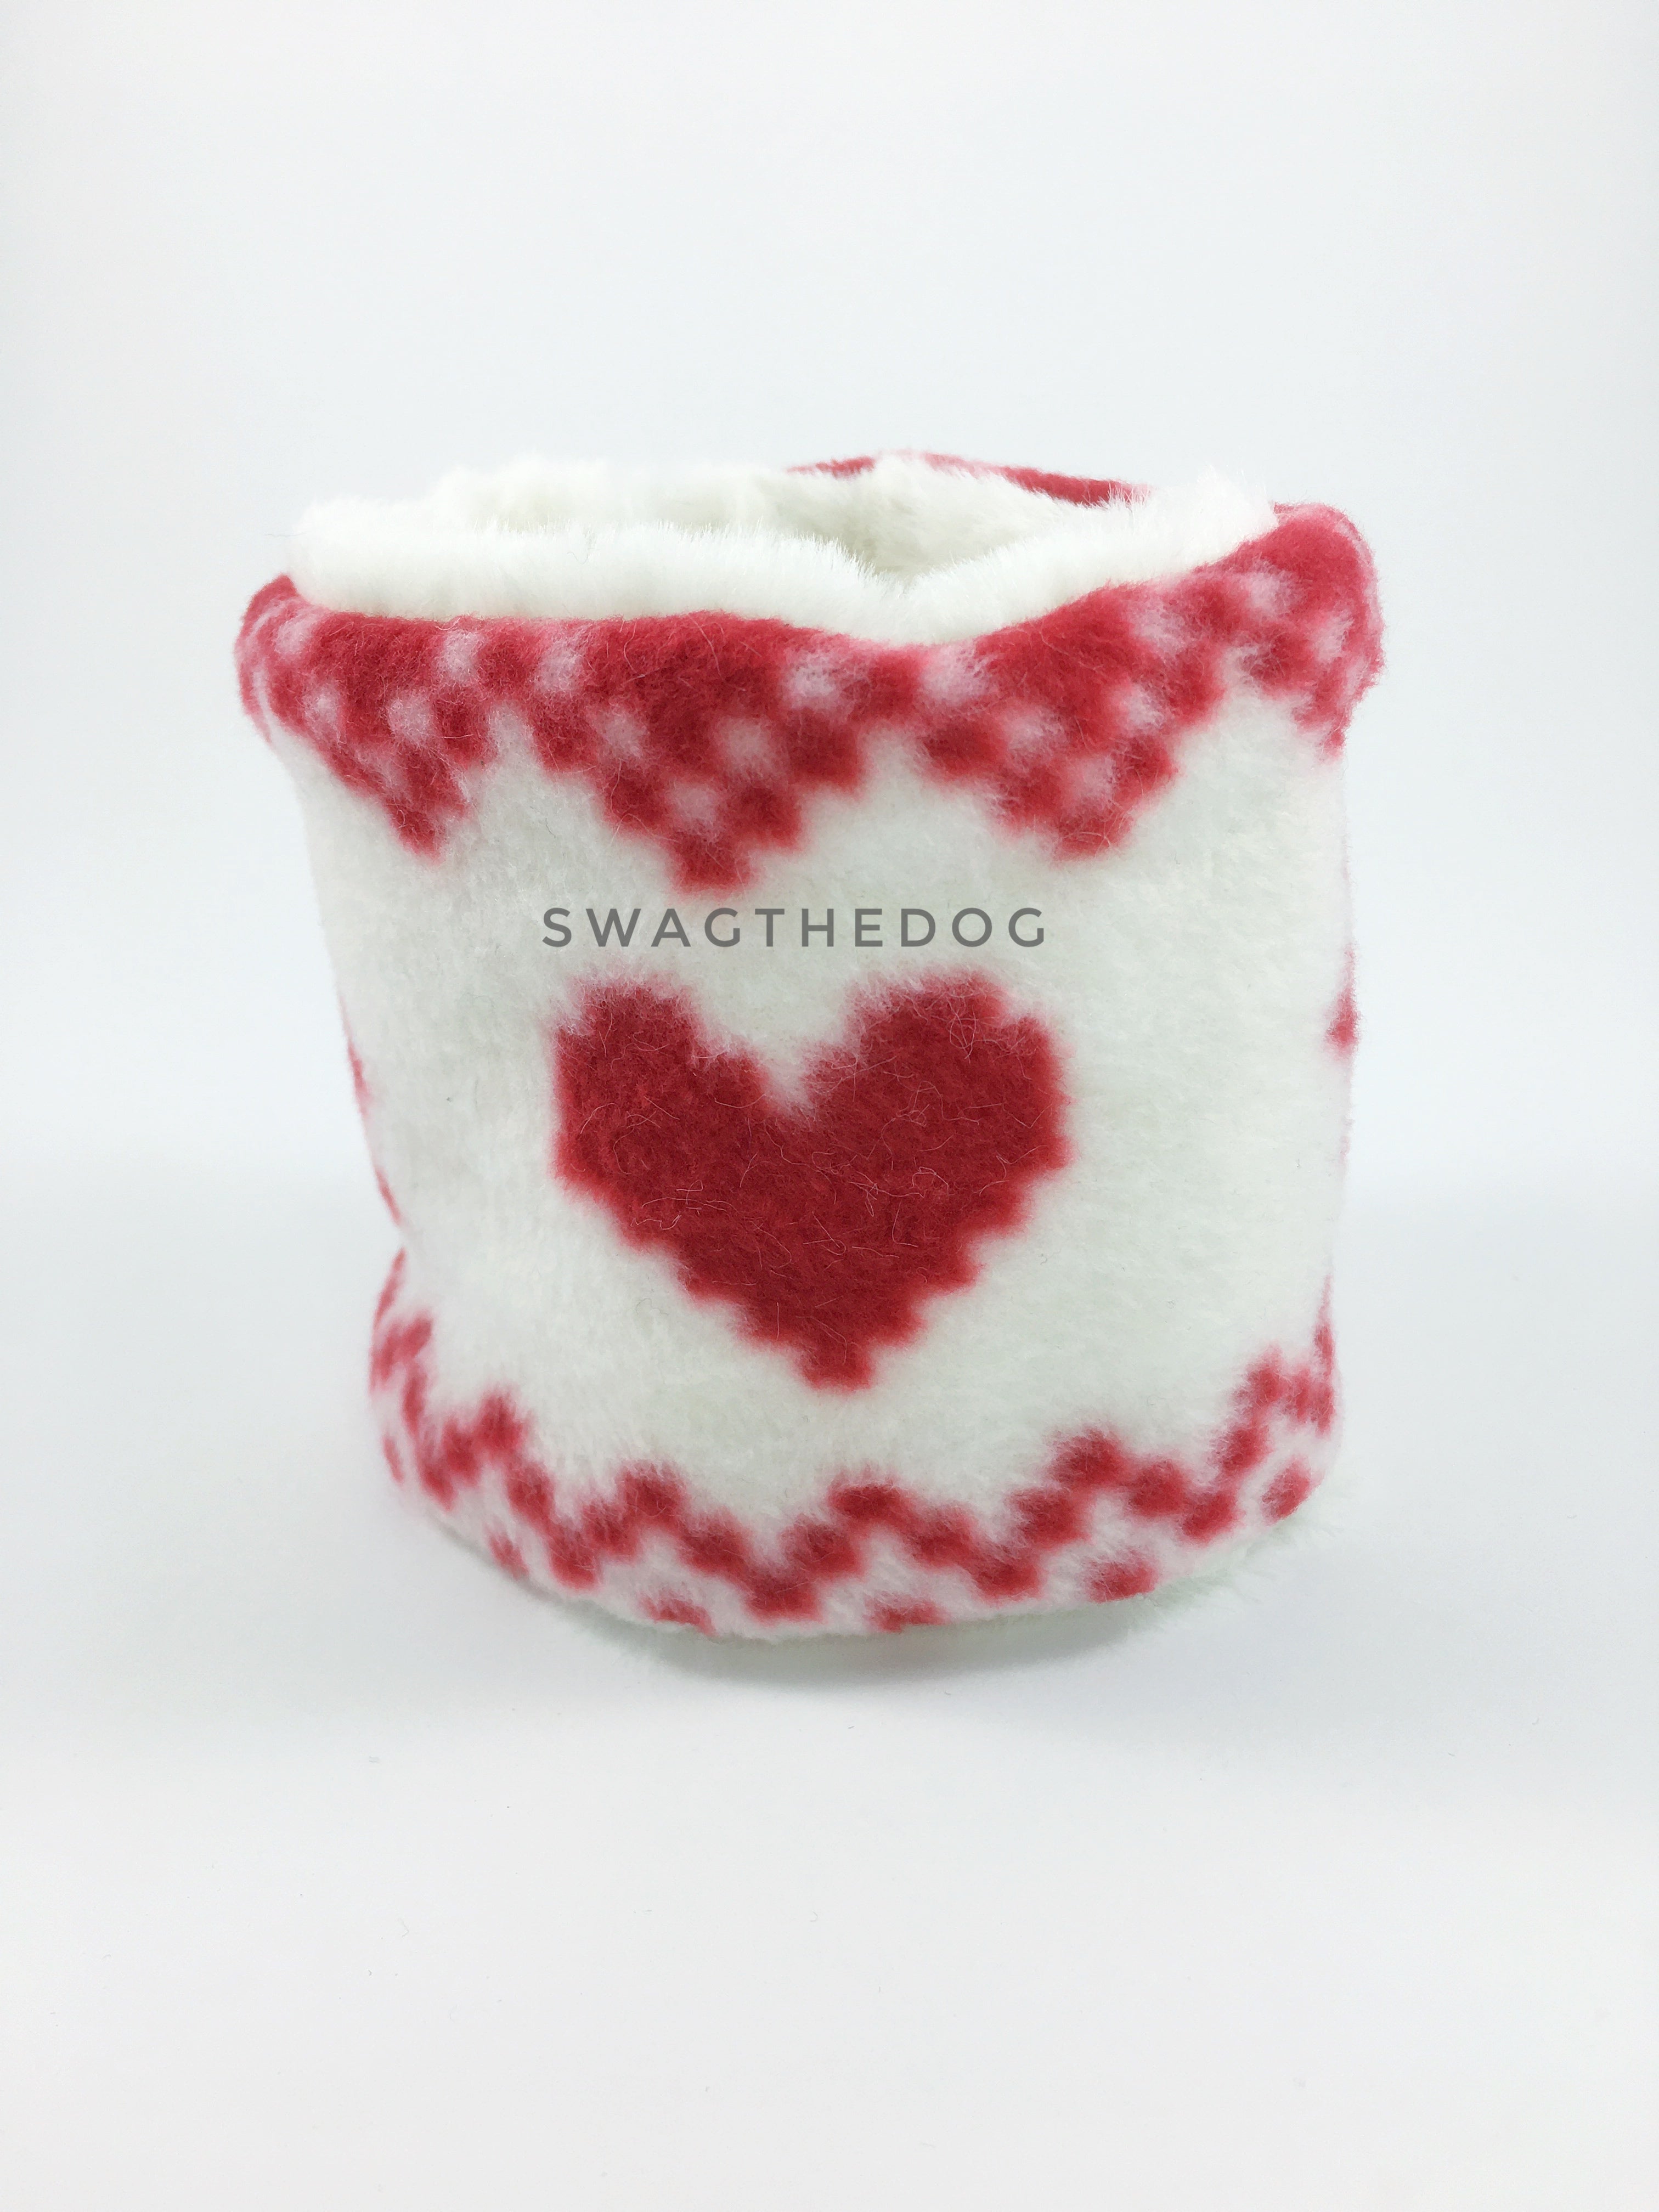 Full of Heart Swagsnood - Product Front View. Full of heart print fleece Dog Snood and cream faux fur peeking out